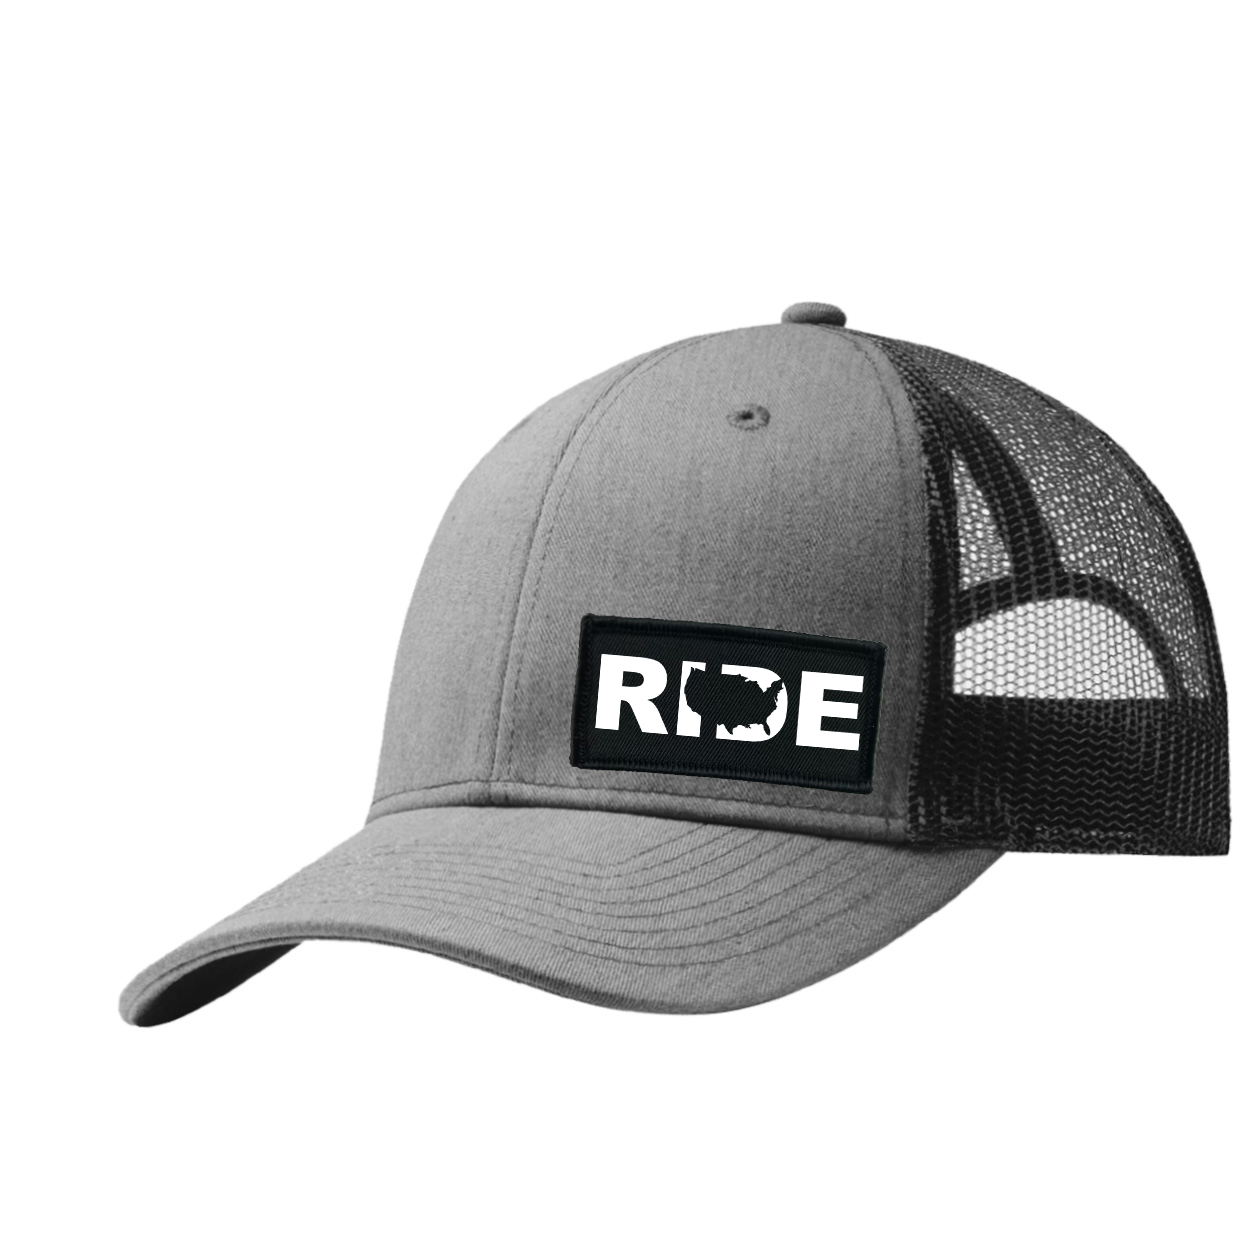 Ride United States Night Out Woven Patch Snapback Trucker Hat Heather Gray/Black (White Logo)